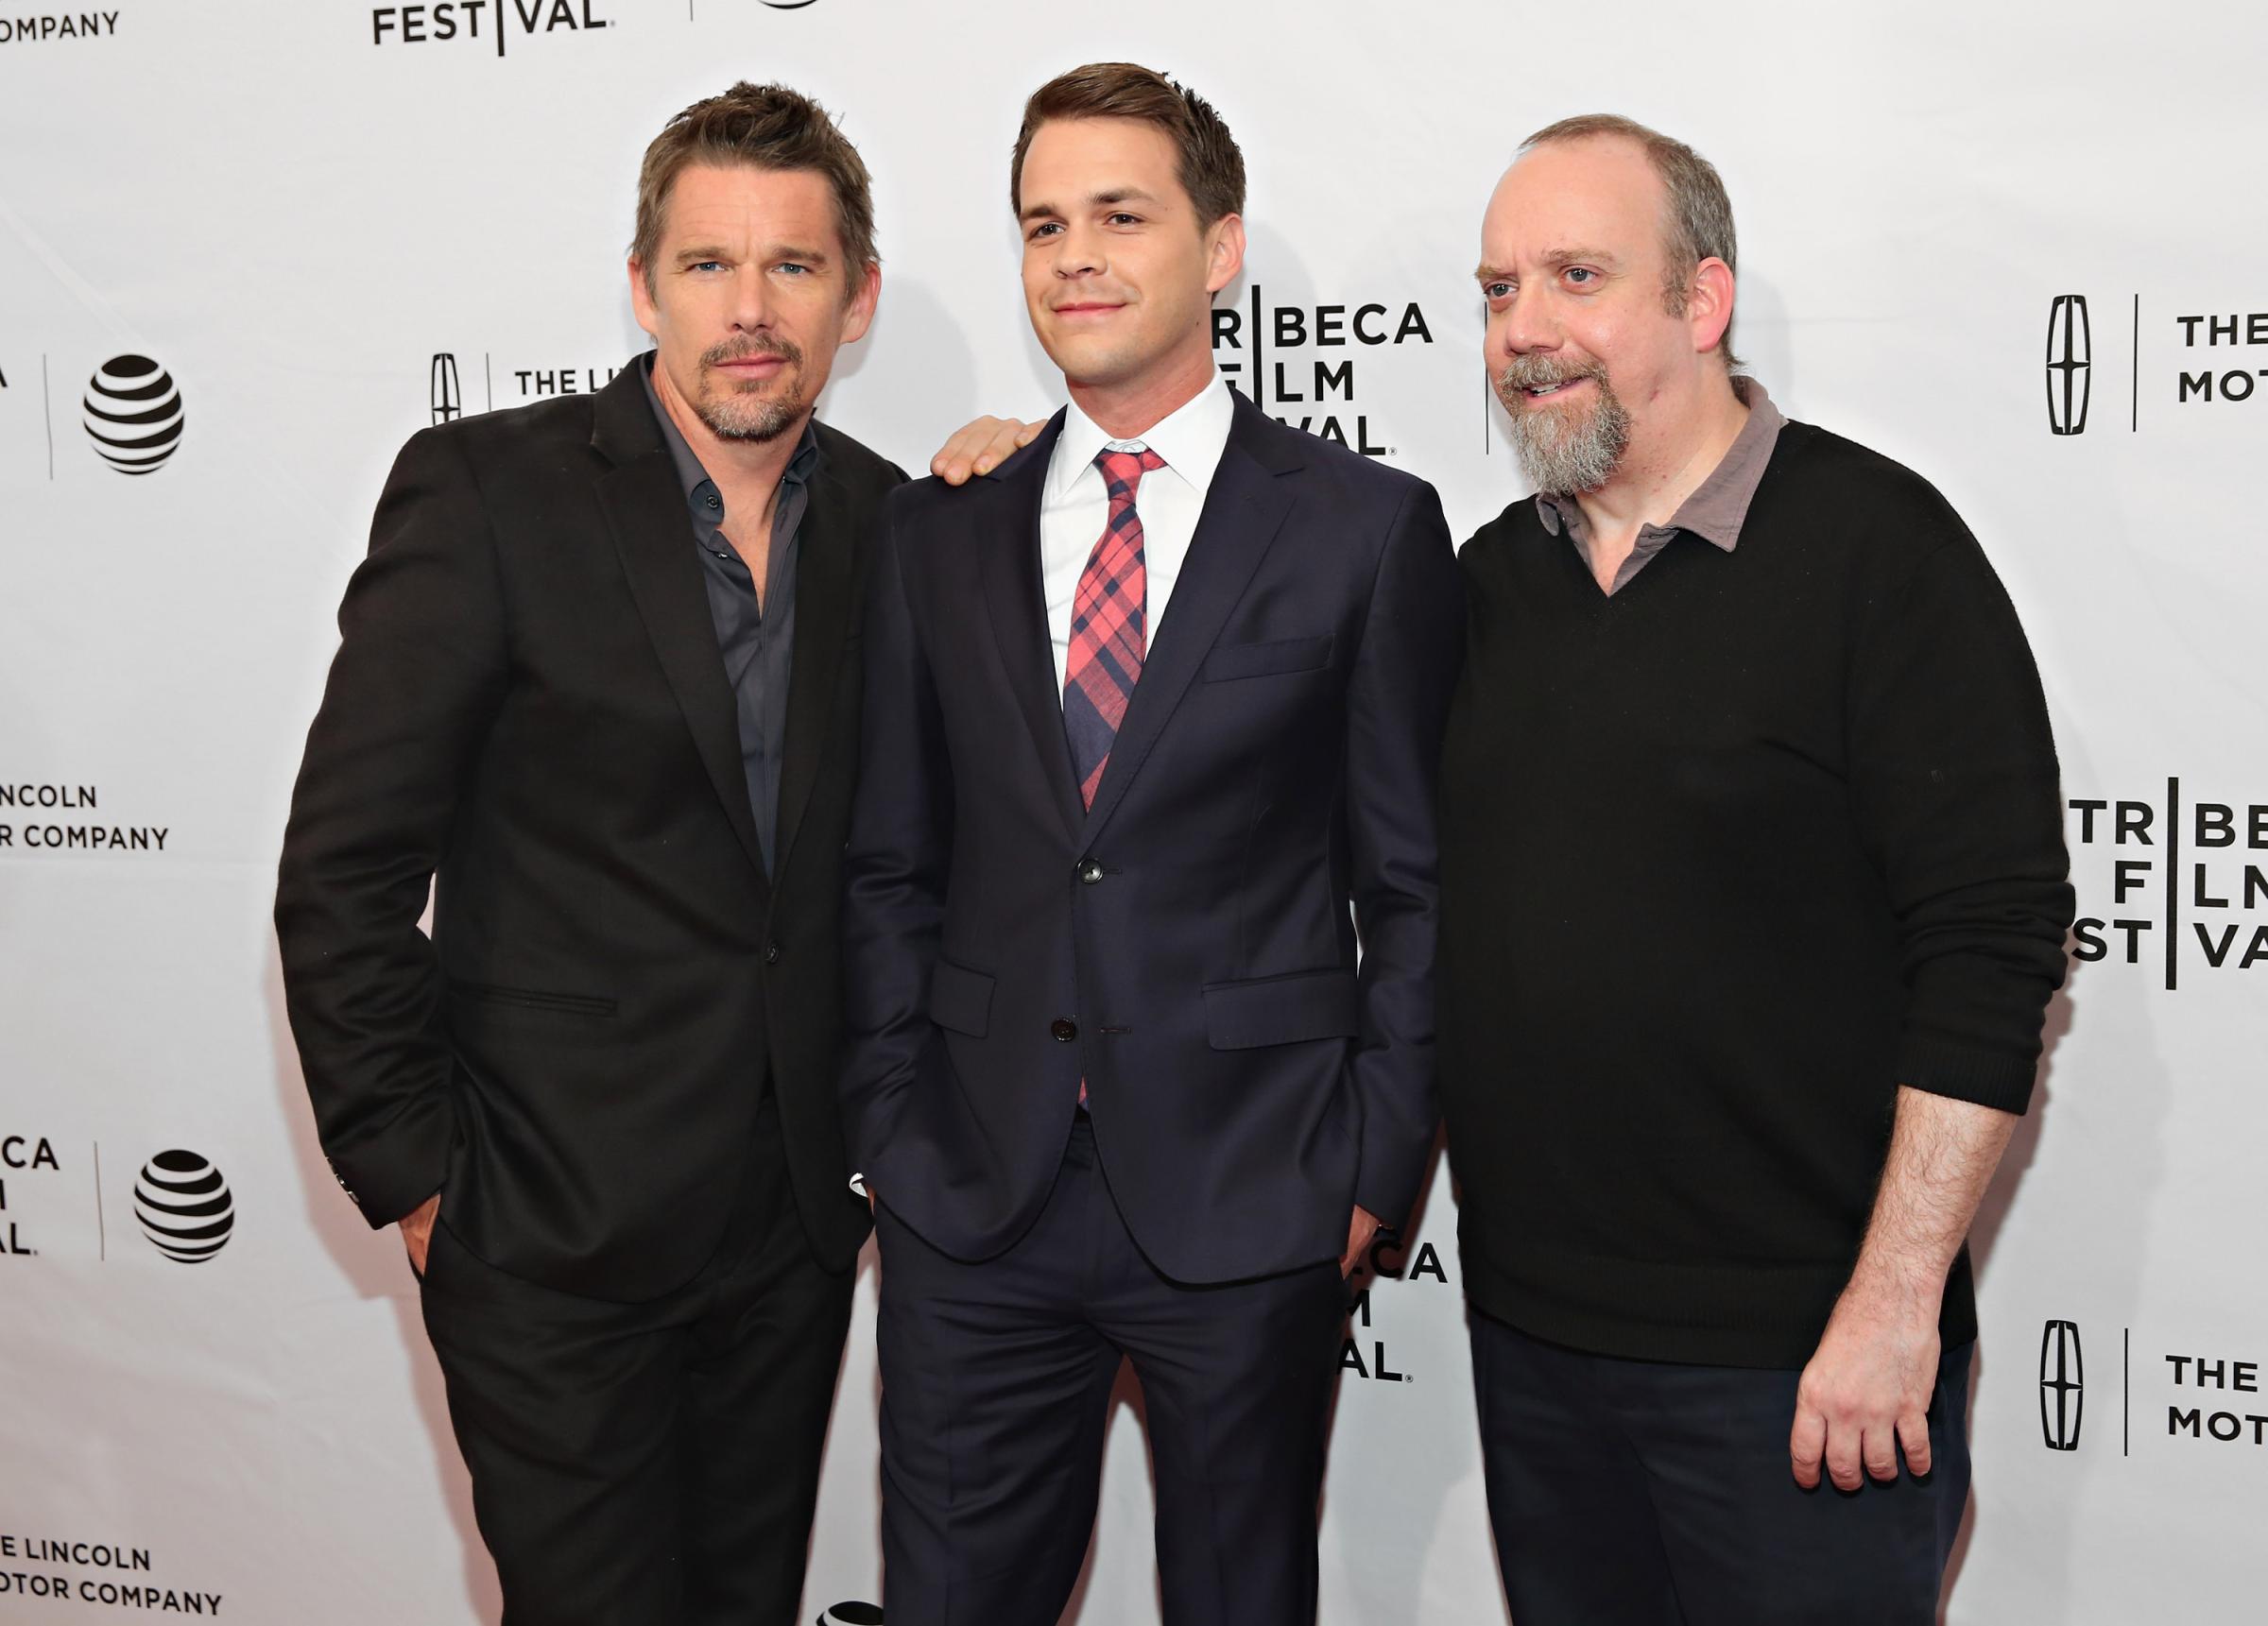 Ethan Hawke, Johnny Simmons and Paul Giamatti attend "The Phenom" Premiere during the 2016 Tribeca Film Festival on April 17, 2016 in New York City.